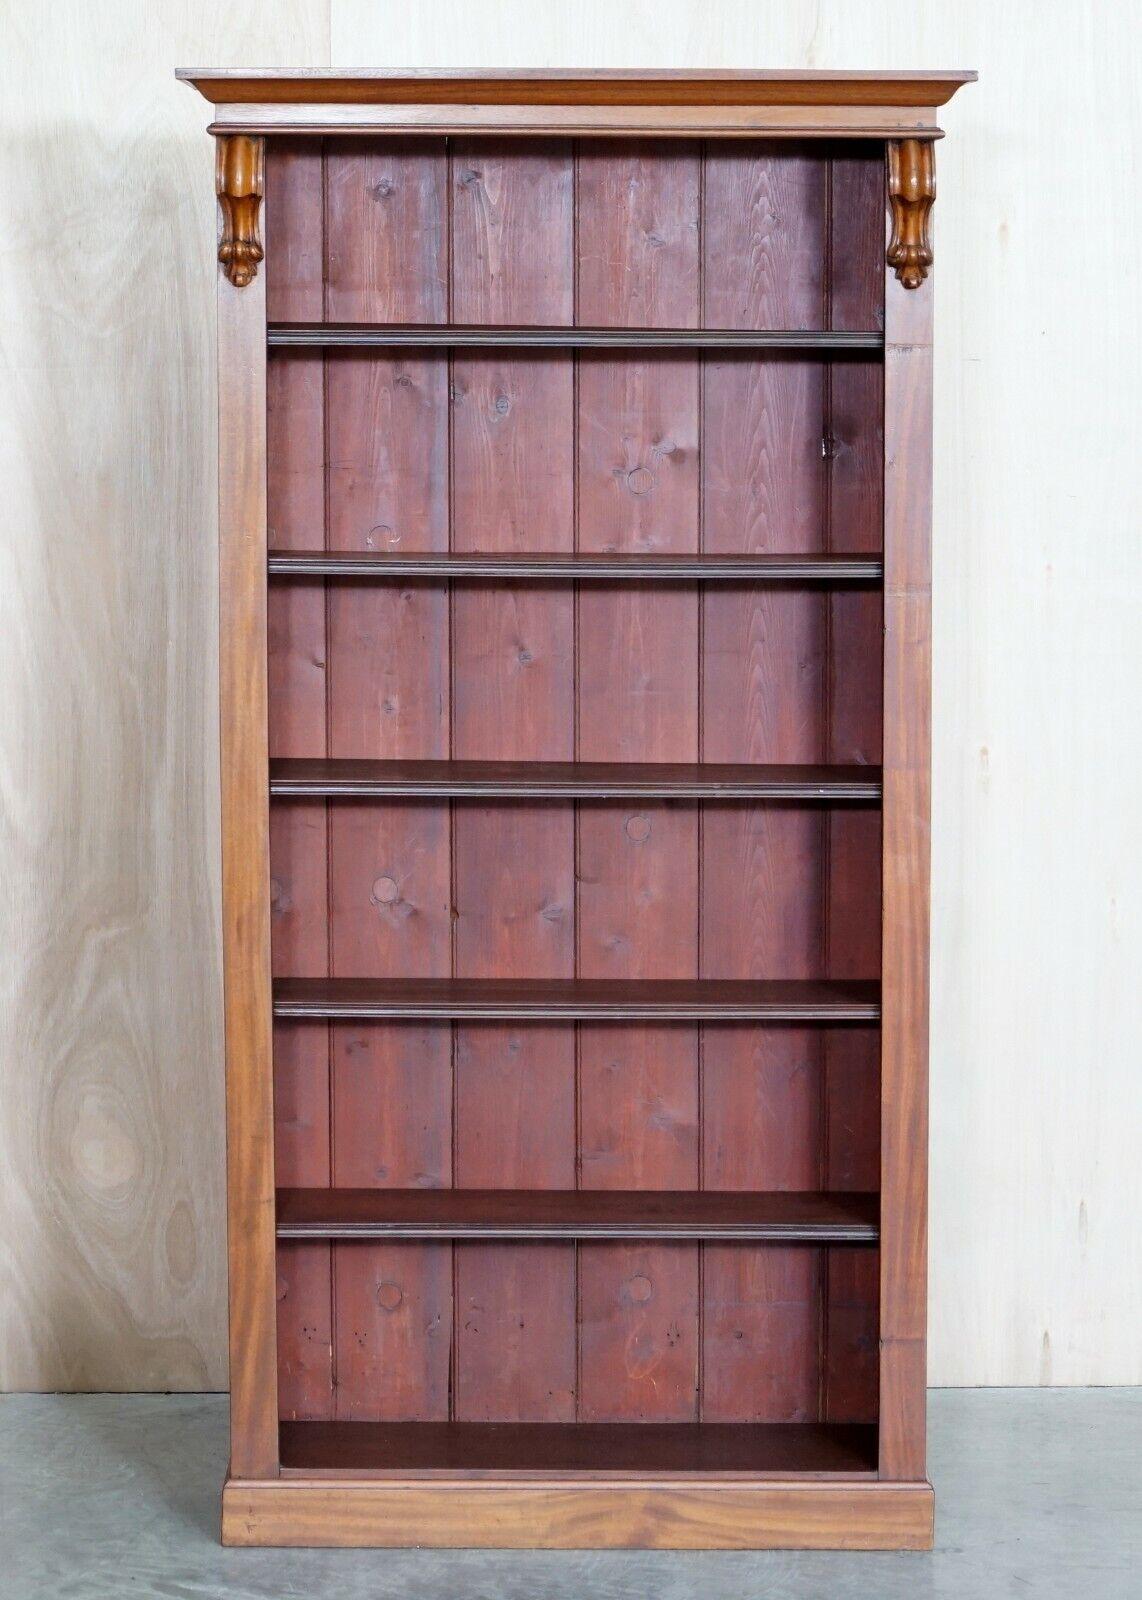 Victorian PAIR OF ViCTORIAN HARDWOOD TALL OPEN LIBRARY BOOKCASES HEIGHT ADJUSTABLE SHELVES